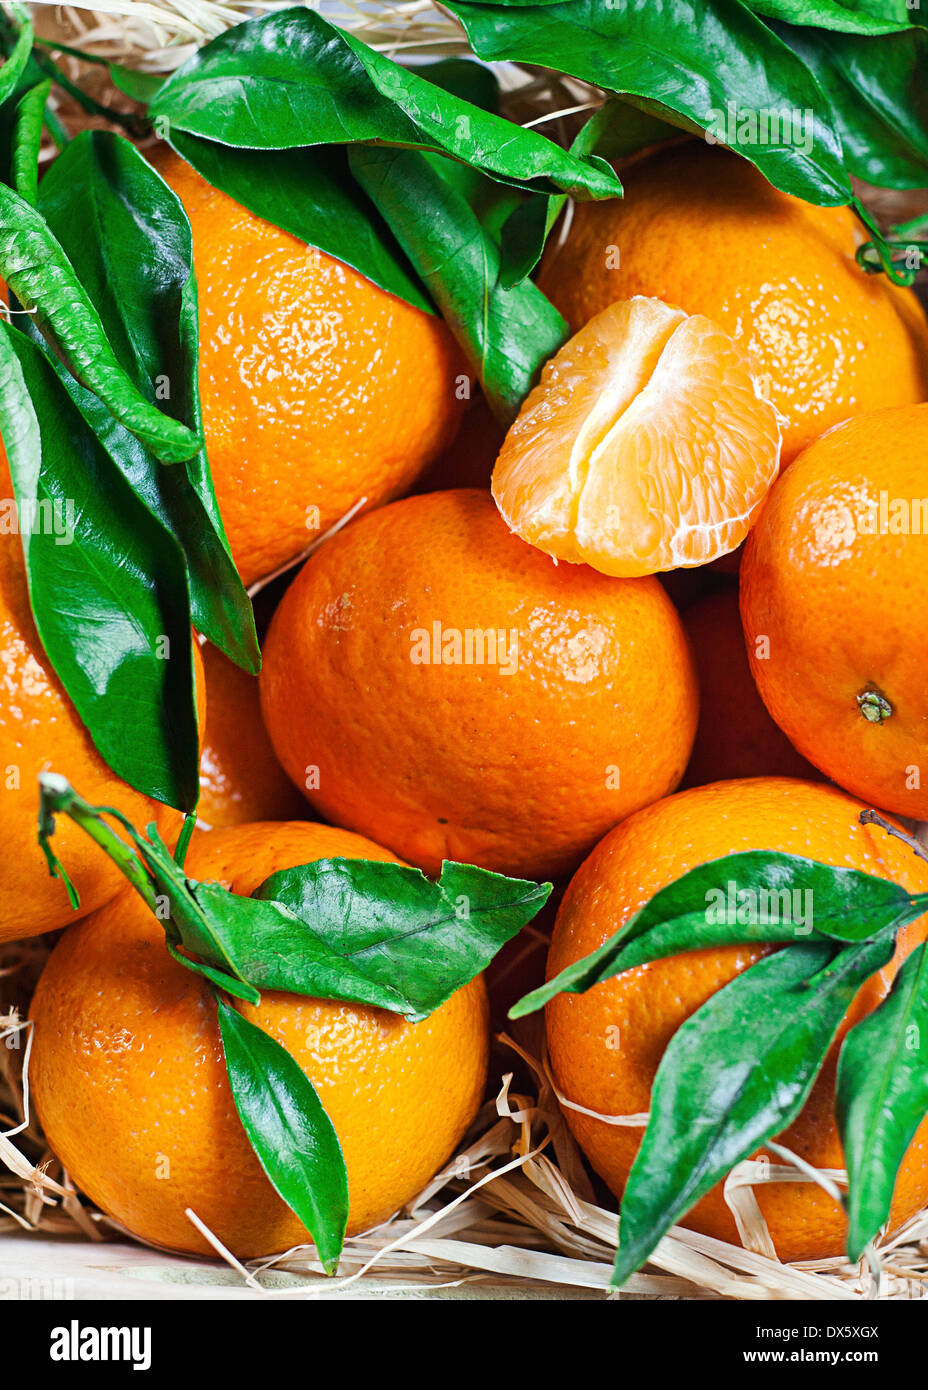 https://c8.alamy.com/comp/DX5XGX/fresh-tangerines-with-leaves-close-up-background-DX5XGX.jpg